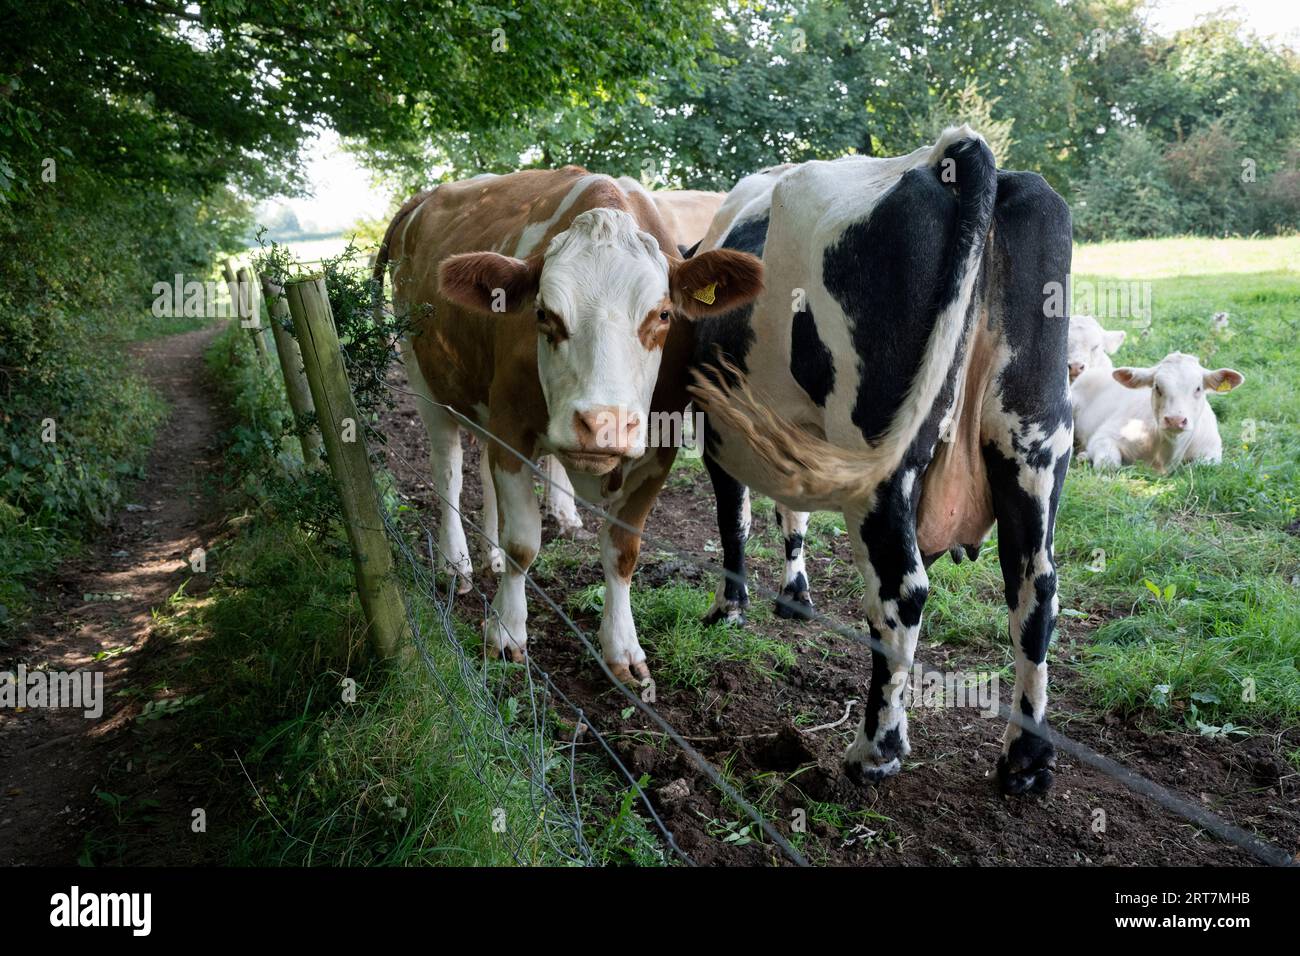 Dairy Cows And Public Footpath, Stock Photo